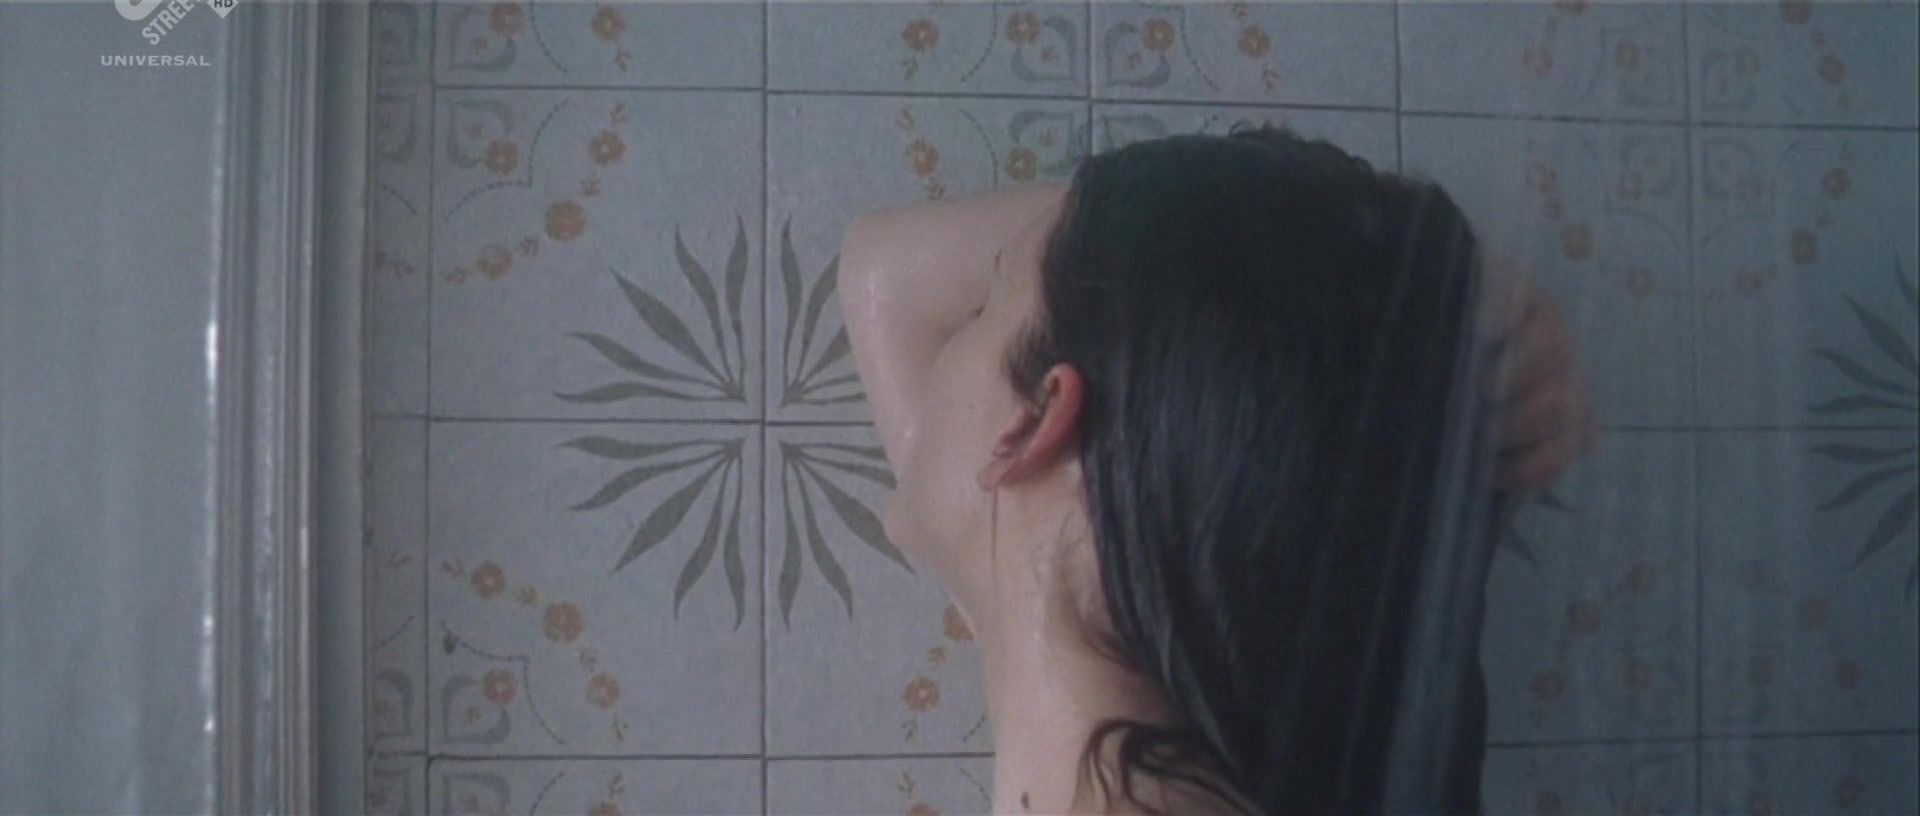 Spandex Topless Melanie Laurent from Shower Video of the French movie "La chambre des morts" PornoOrzel